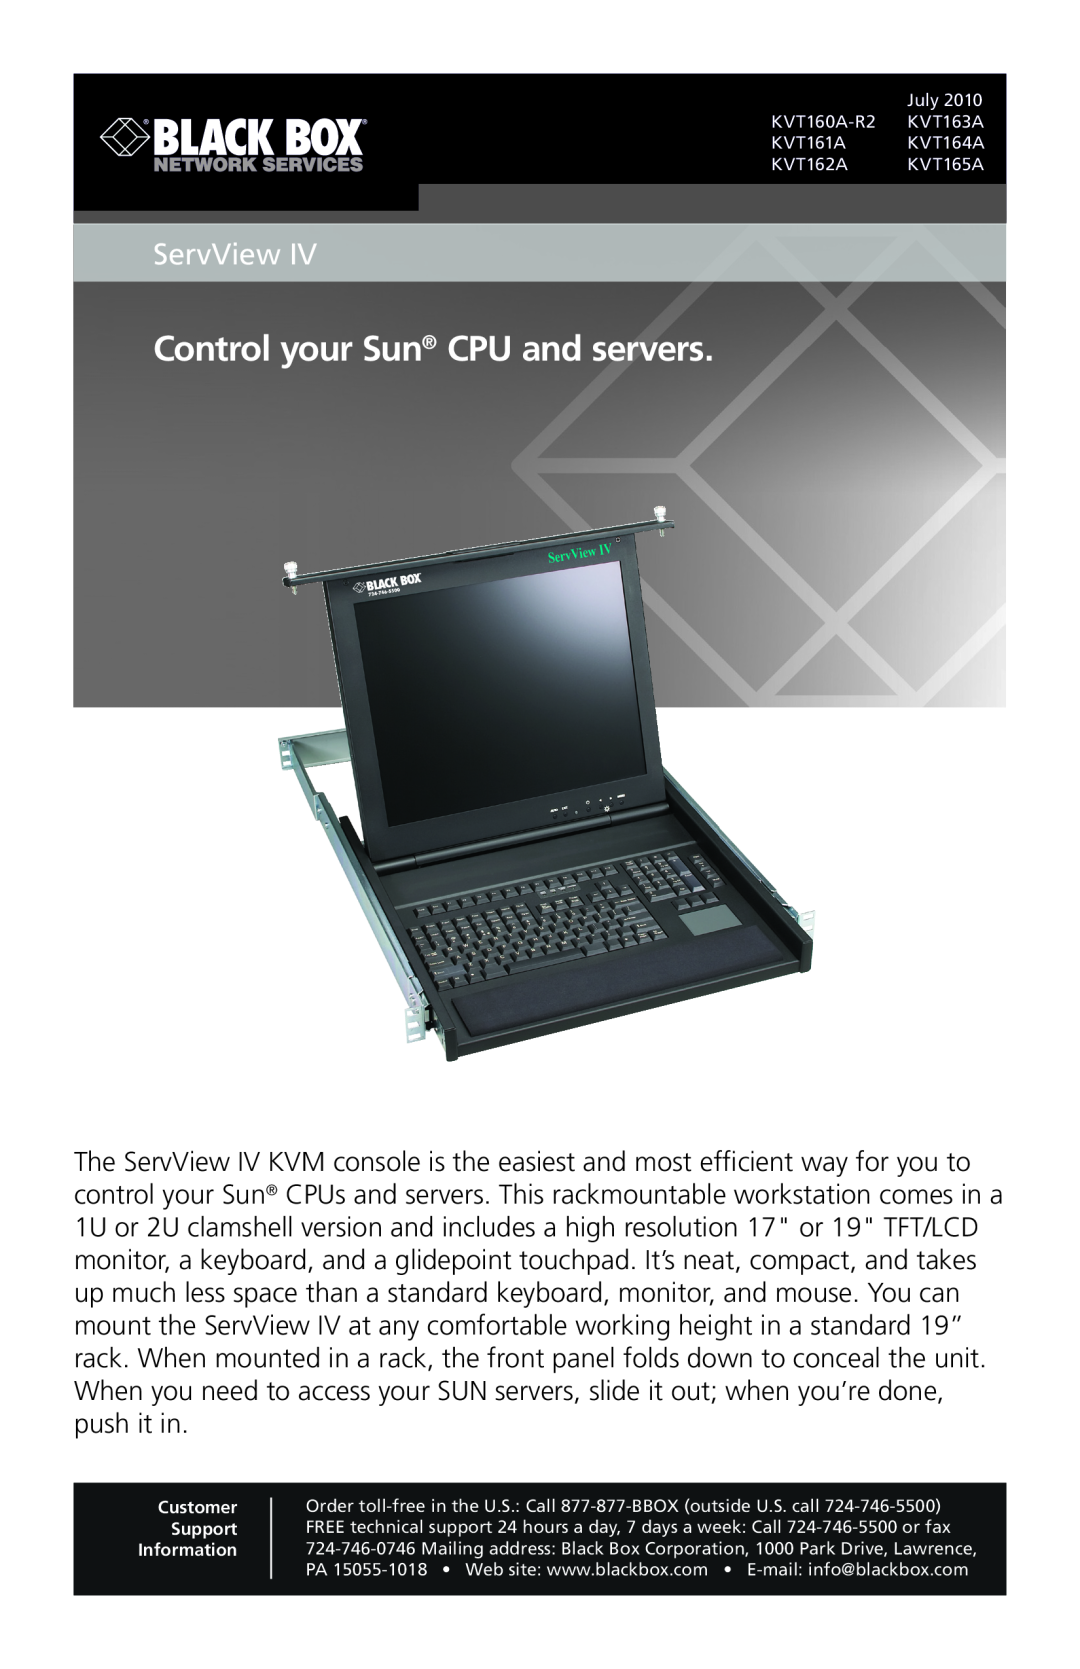 Black Box KVT165A, ervView IV, KVT160A-R2, KVT164A, KVT162A, KVT163A KVT161A manual ServView, Control your Sun CPU and servers 